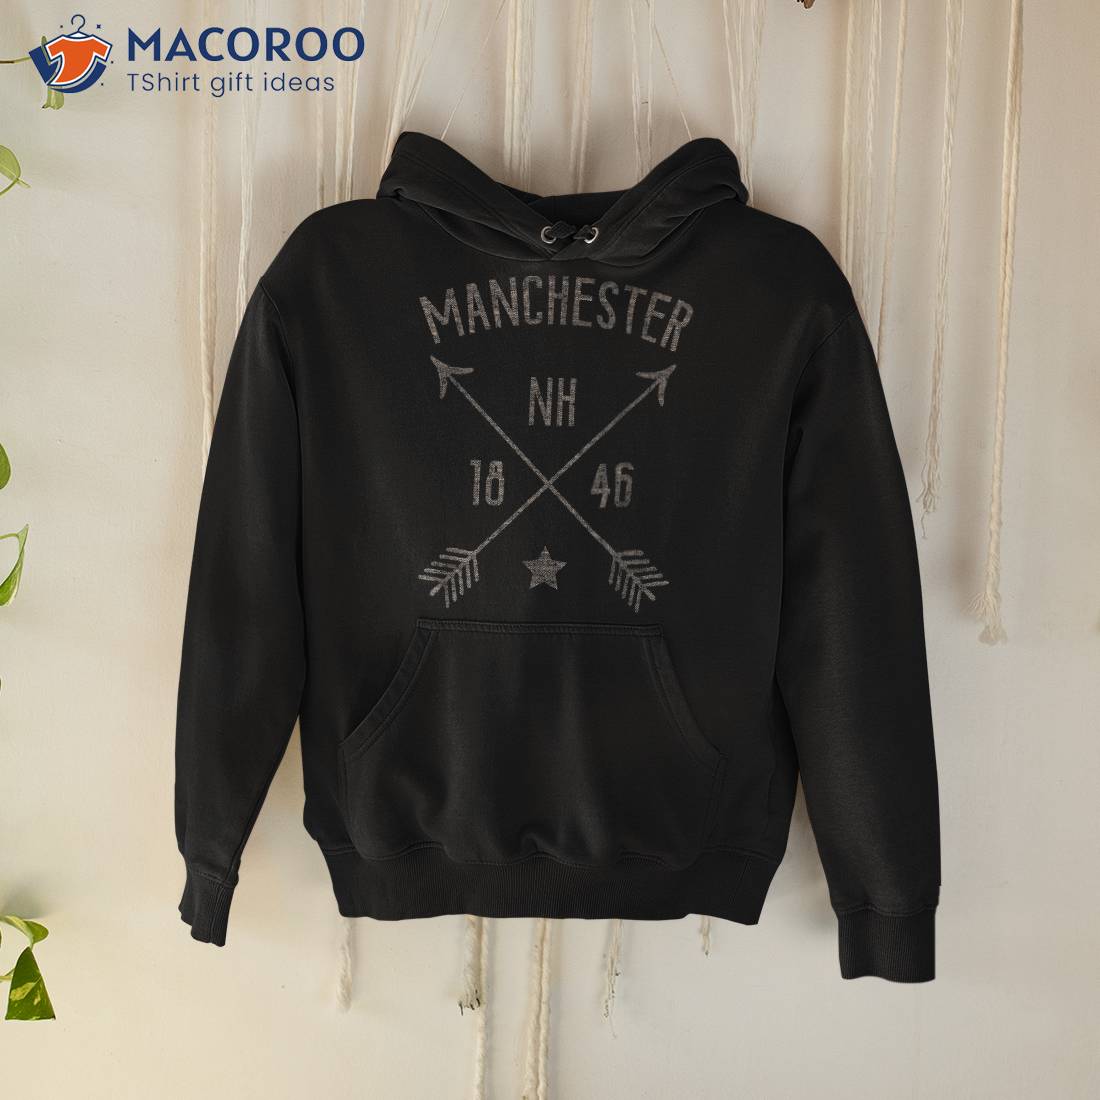 Manchester New Hampshire Distressed Boho Style Home City Shirt Hoodie